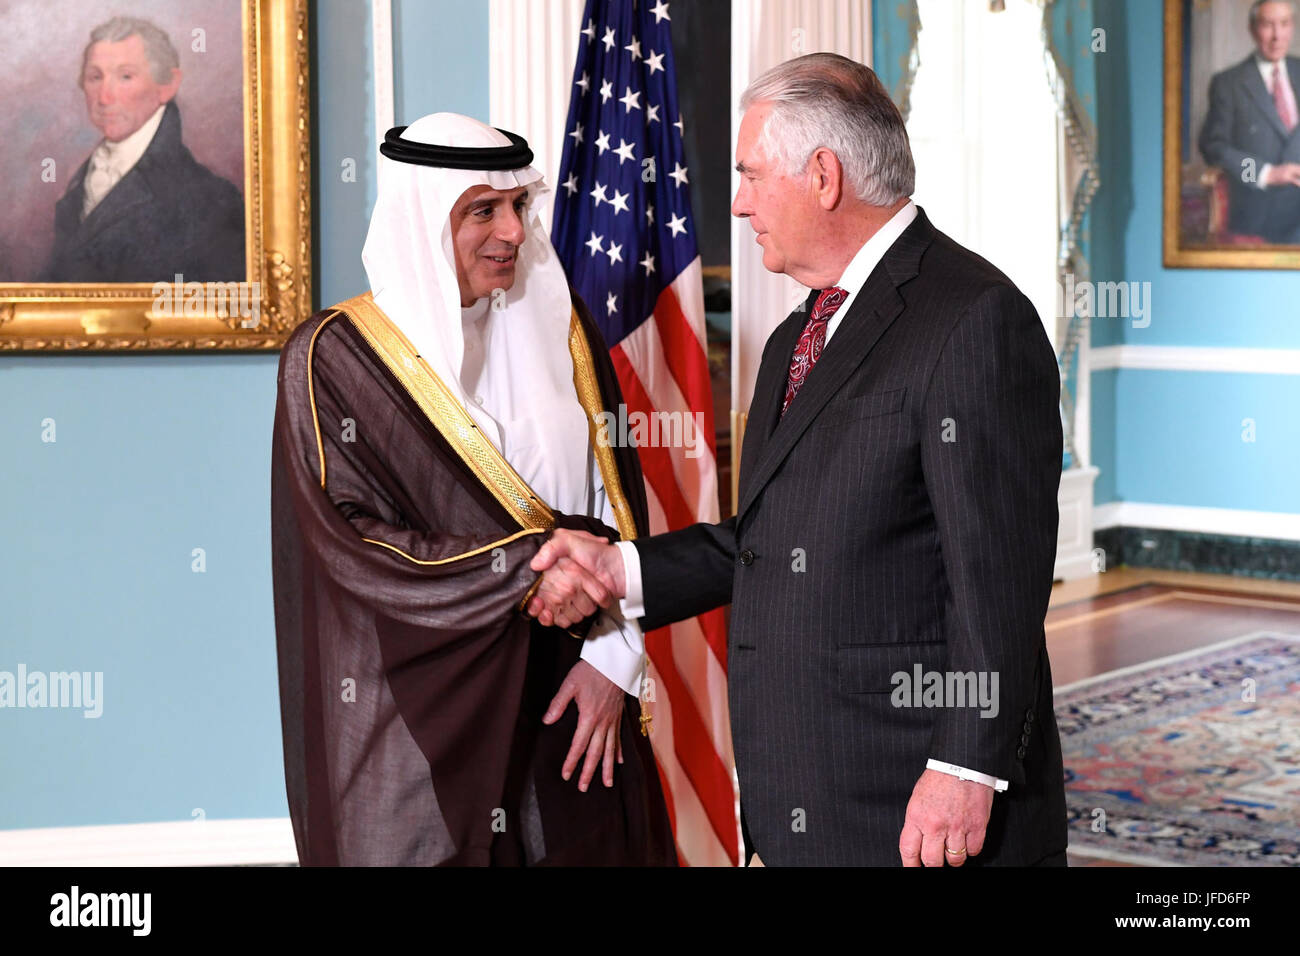 U.S. Secretary of State Rex Tillerson greets Saudi Foreign Minister Adel al-Jubeir before their bilateral meeting at the U.S. Department of State in Washington, D.C., on May 2, 2017. Stock Photo